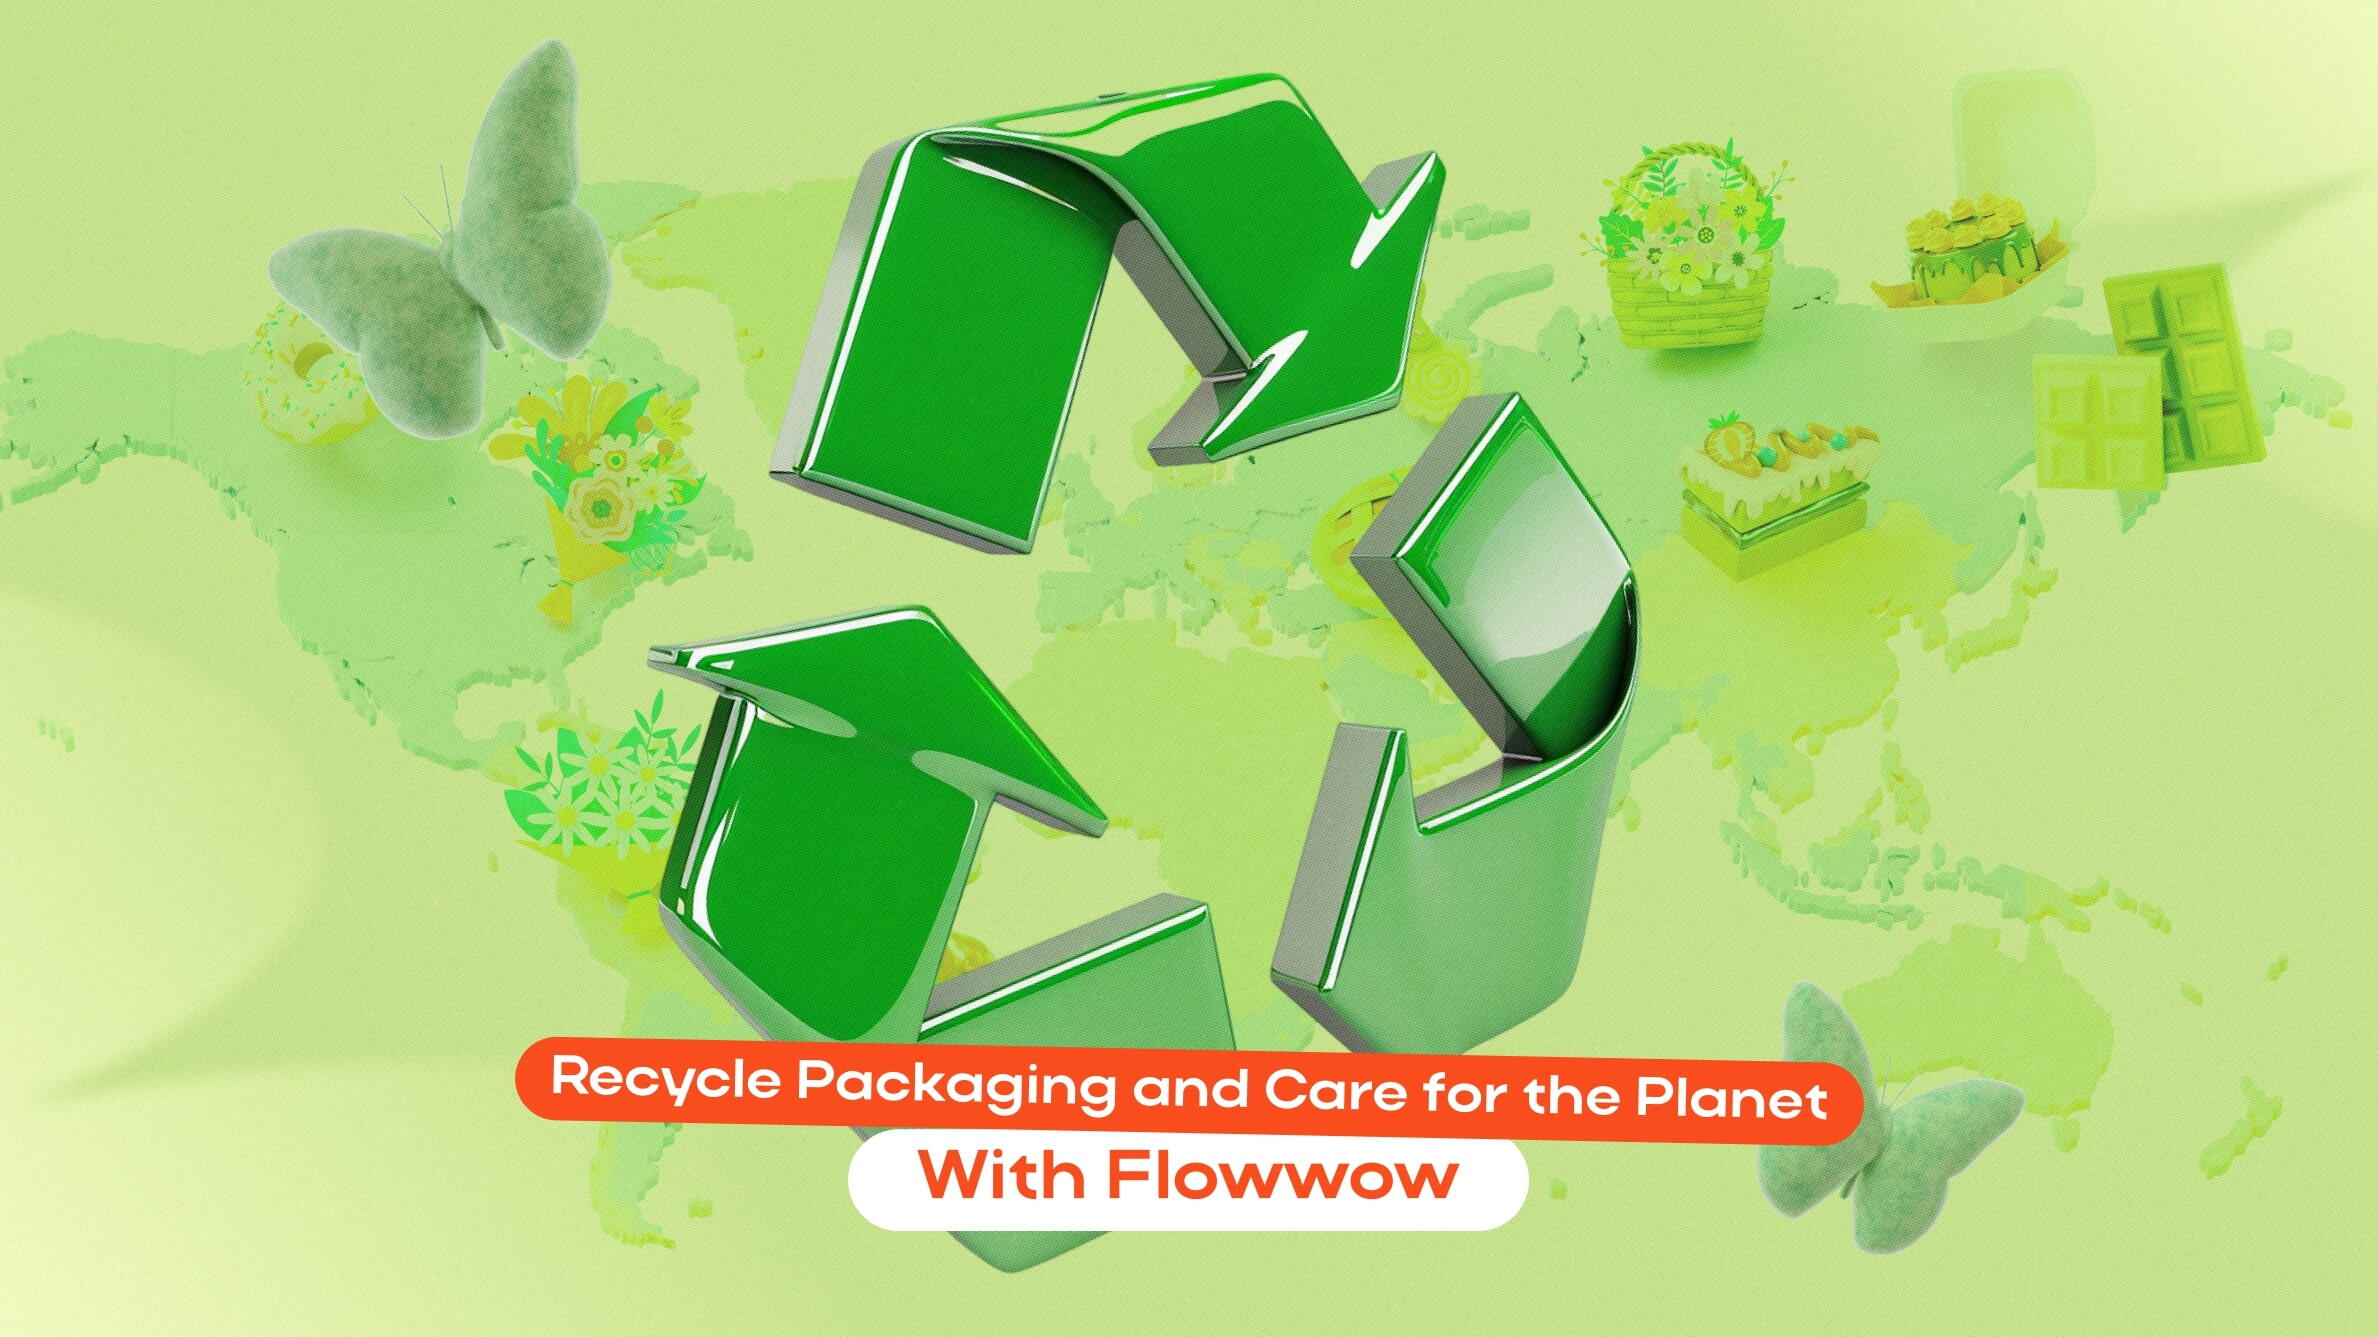 Recycle Packaging and Care for the Planet With Flowwow